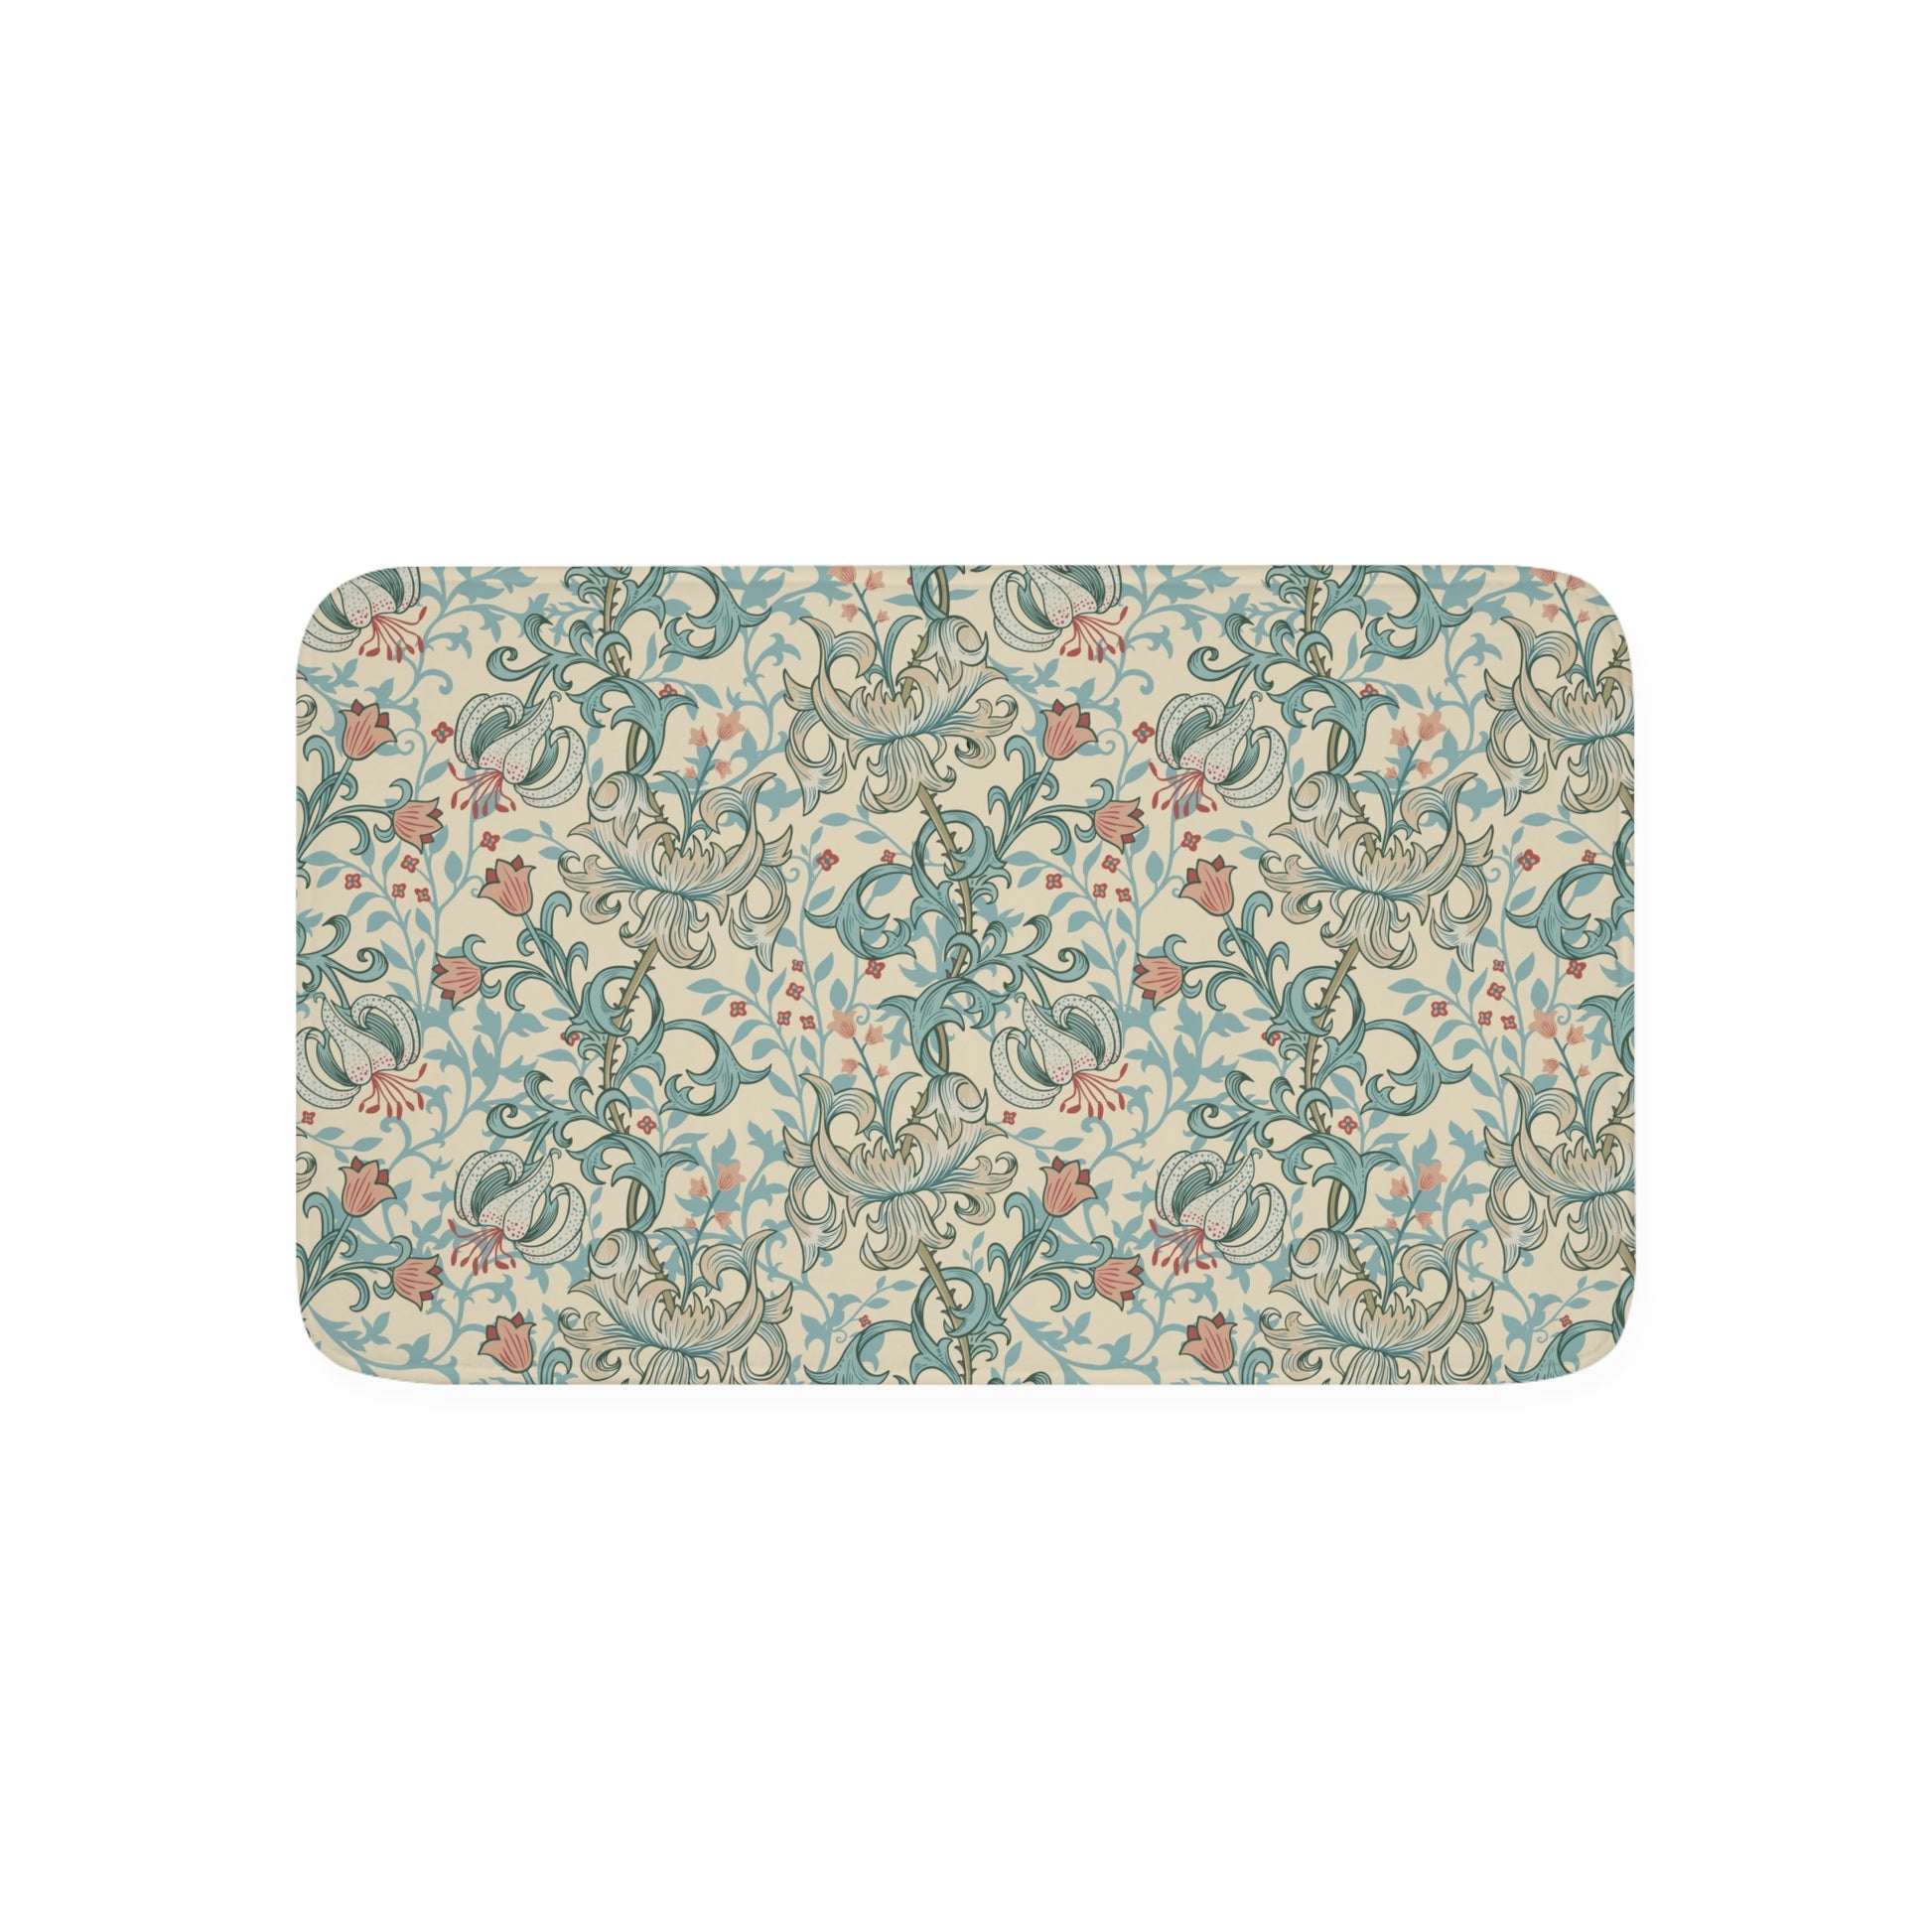 william-morris-co-memory-foam-bath-mat-golden-lily-collection-mineral-5